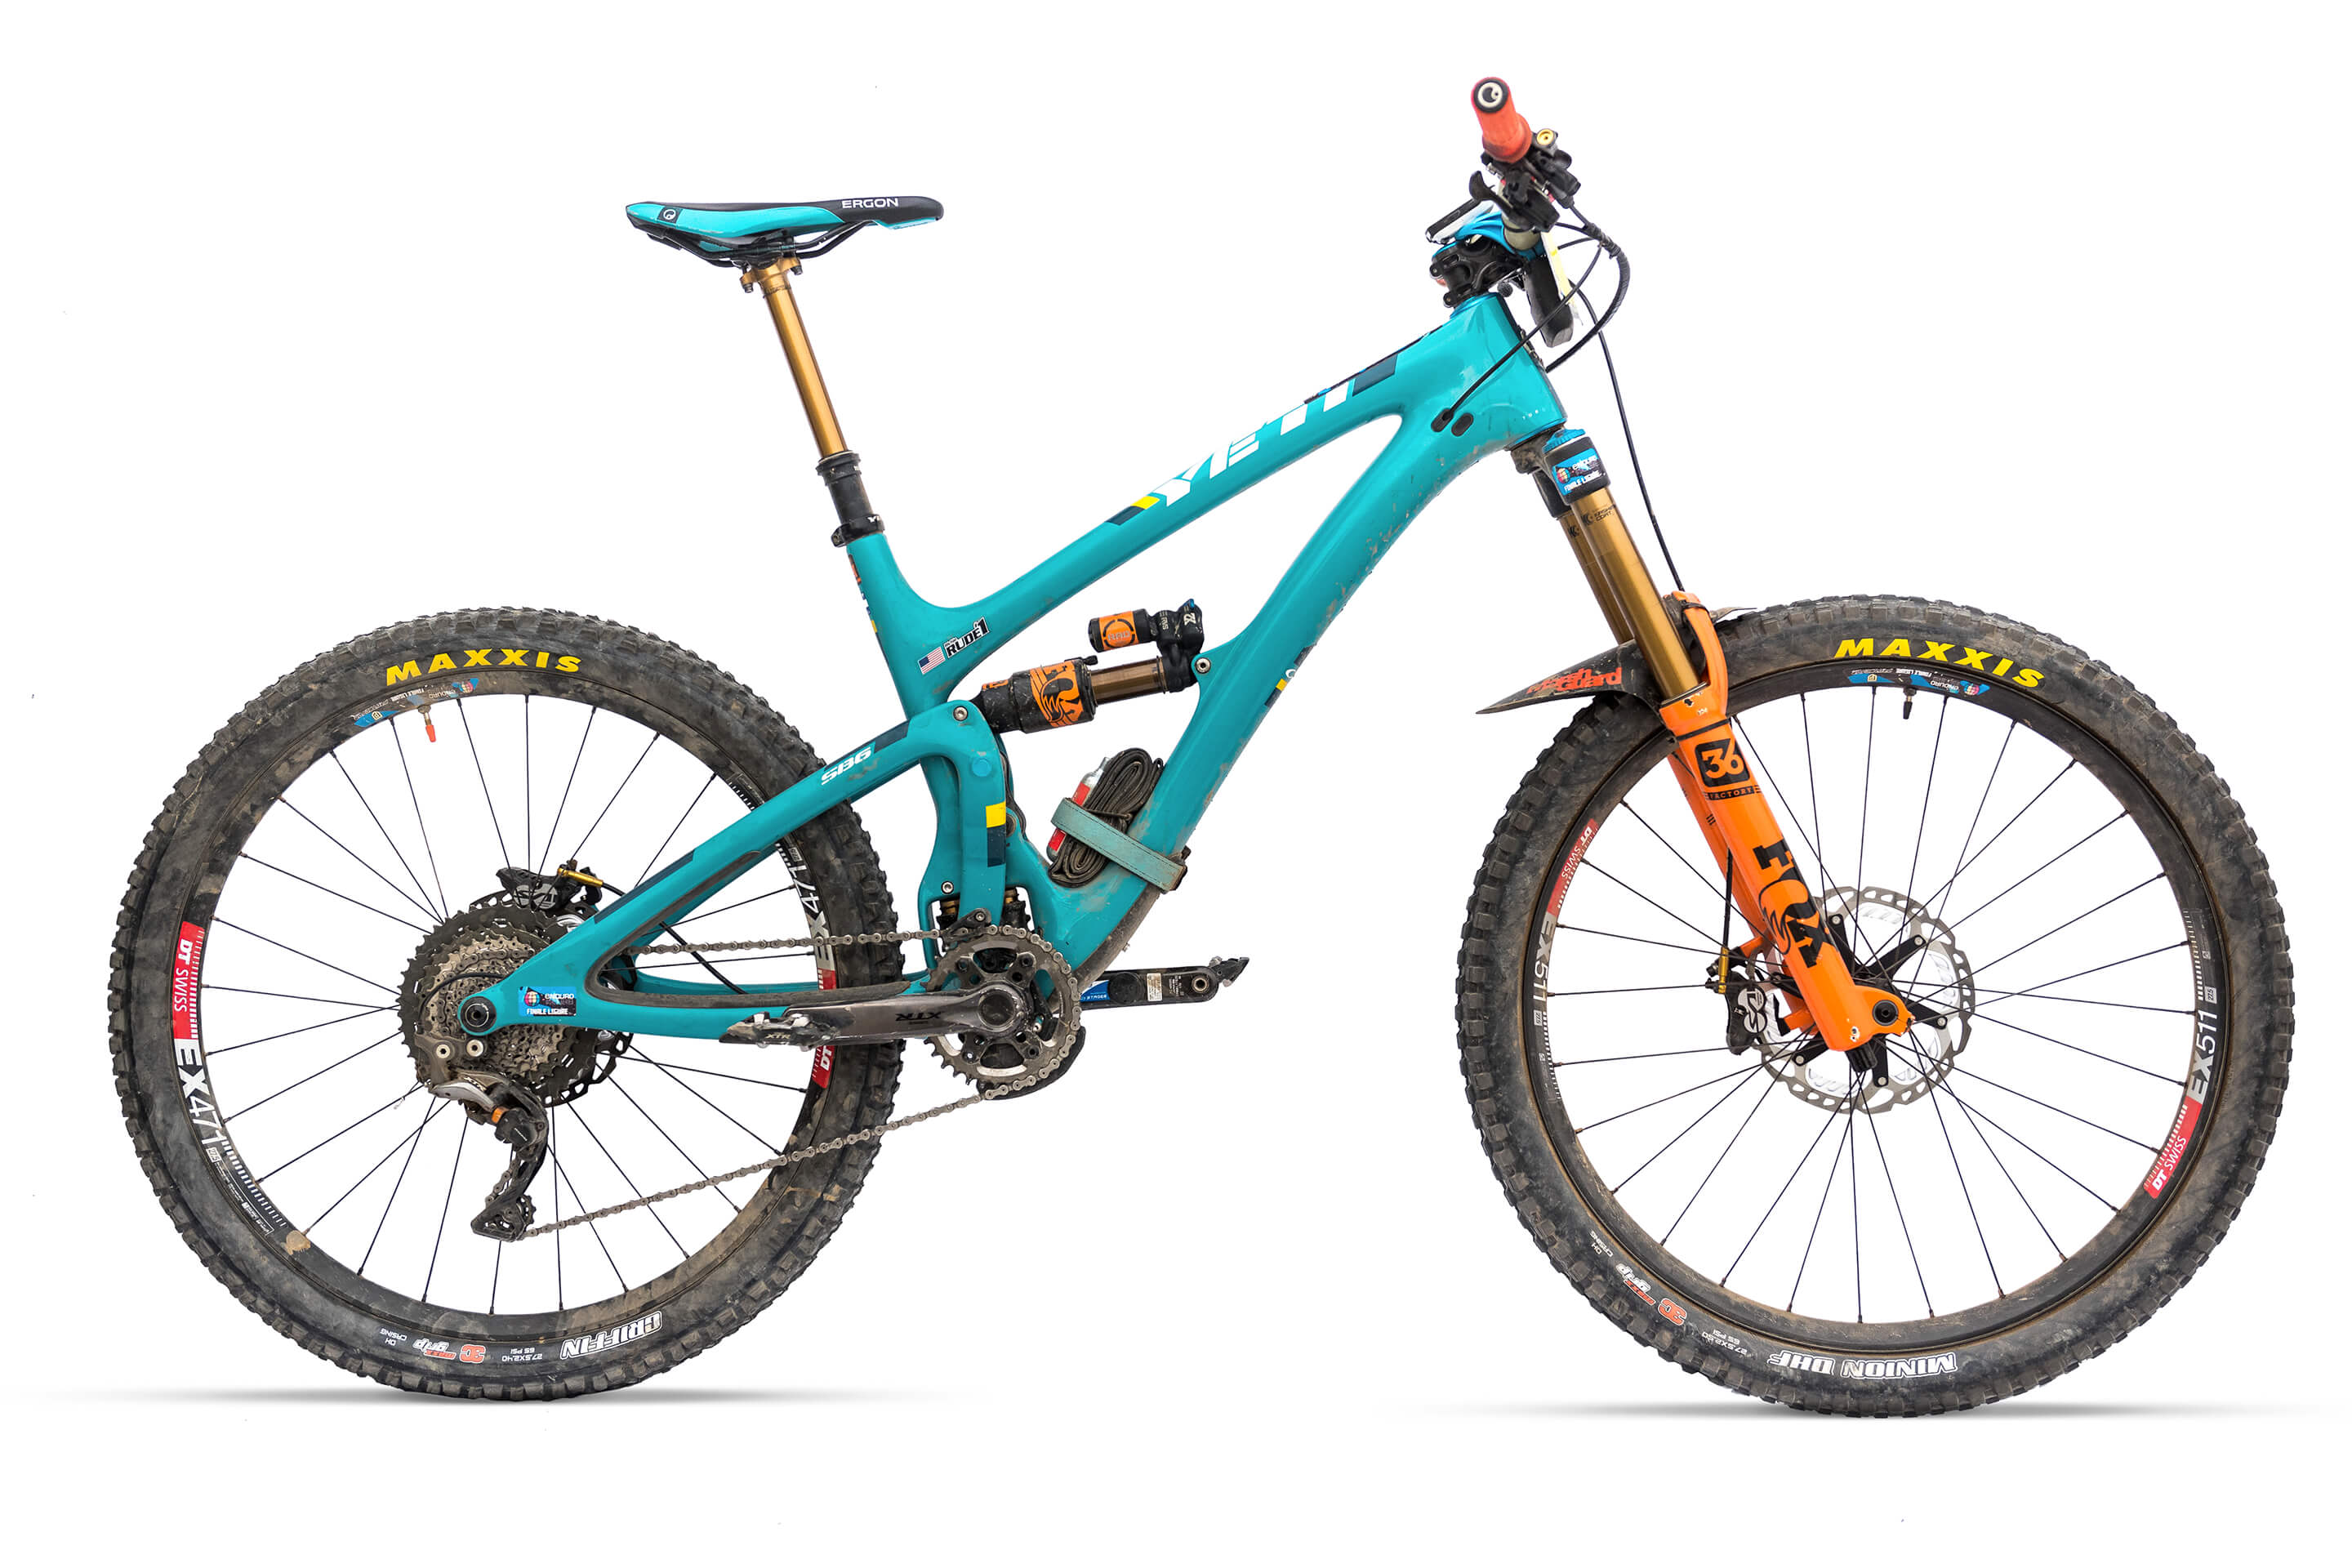 Richie Rude's Yeti SB6 equipped with an XTR drivetrain and brakes